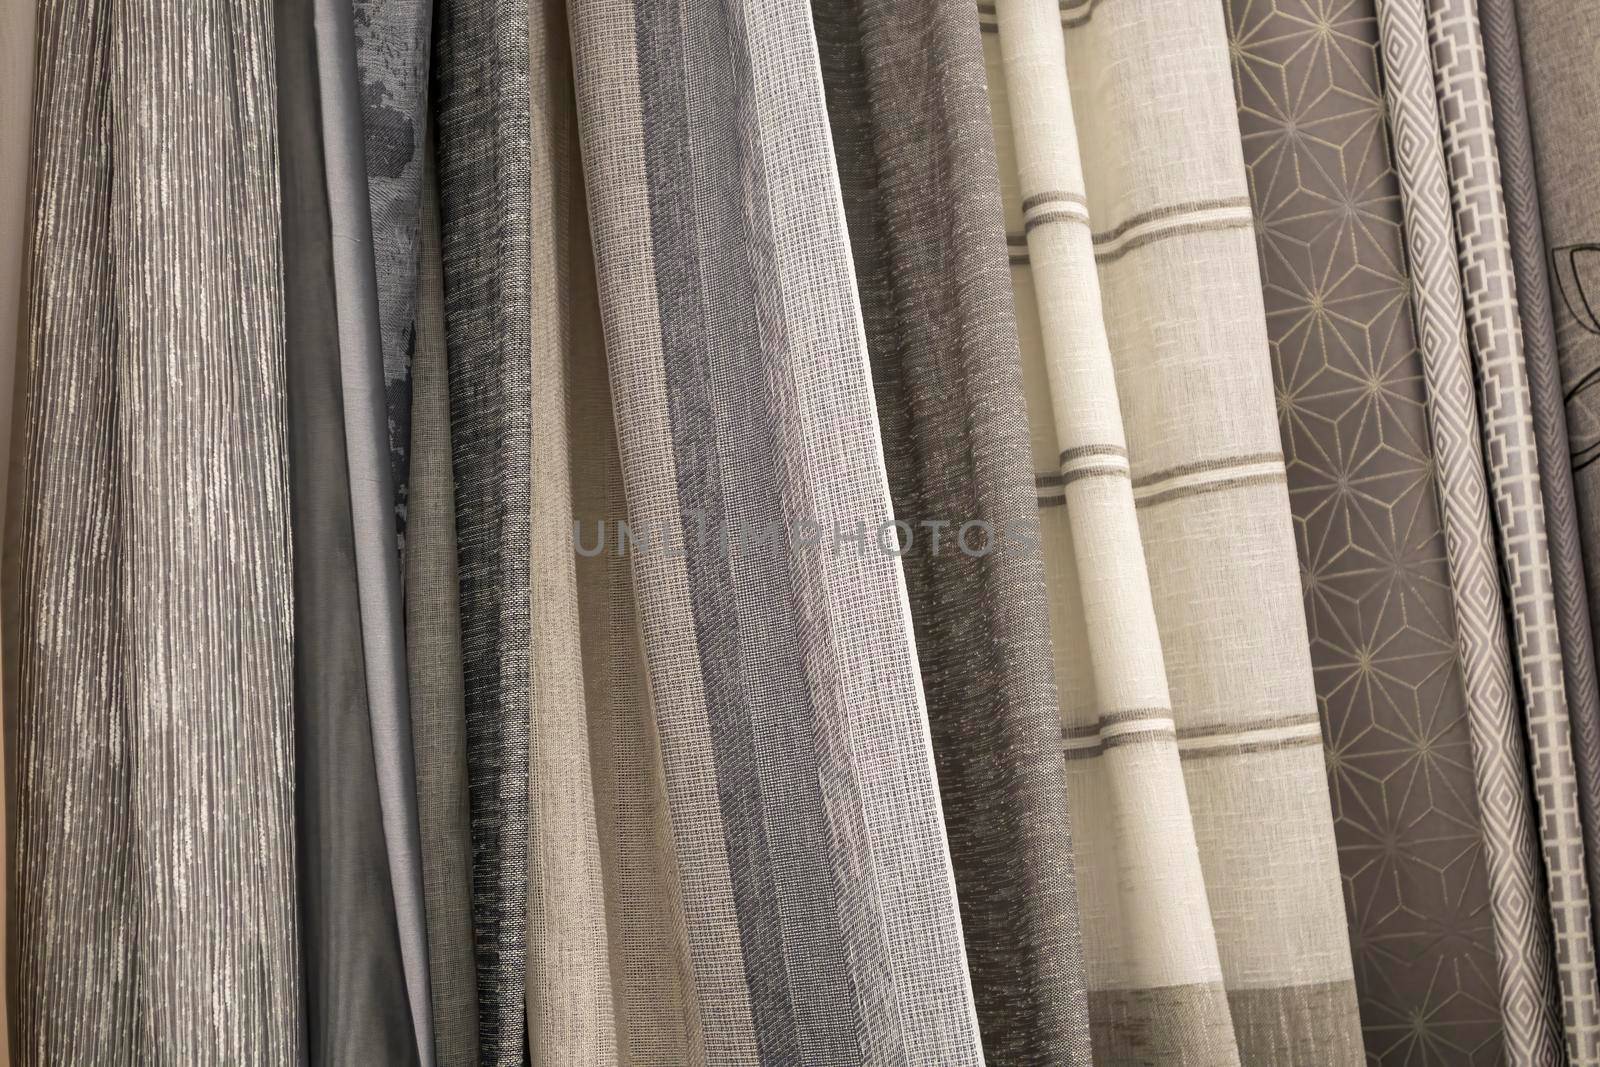 multicolored textures of fabrics on the shelves of stores close-up. High quality photo